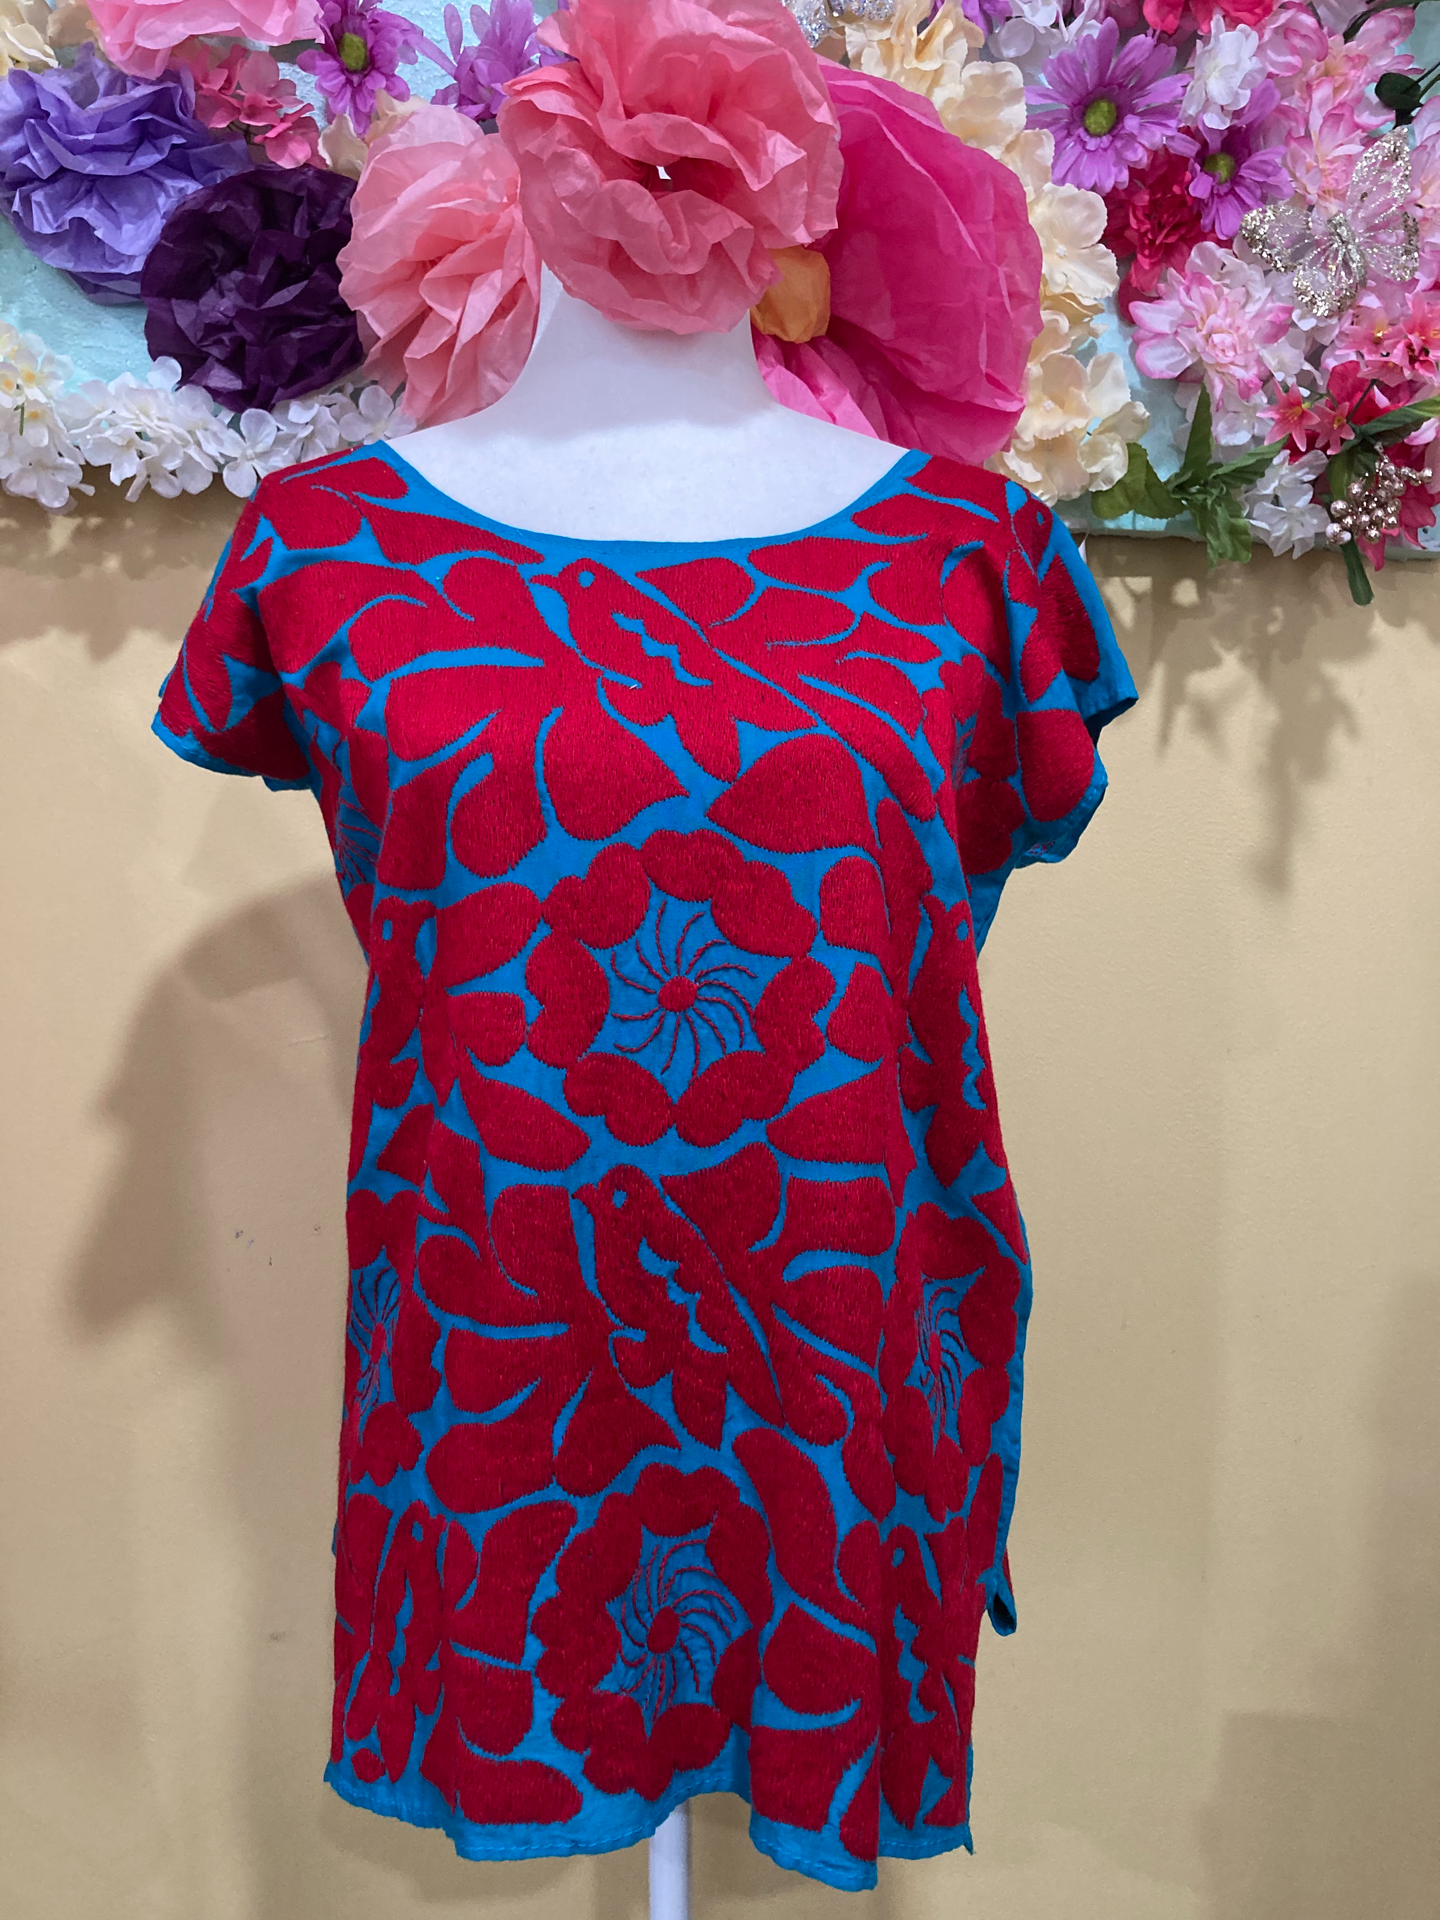 Jalapa Top / Turquoise and red color